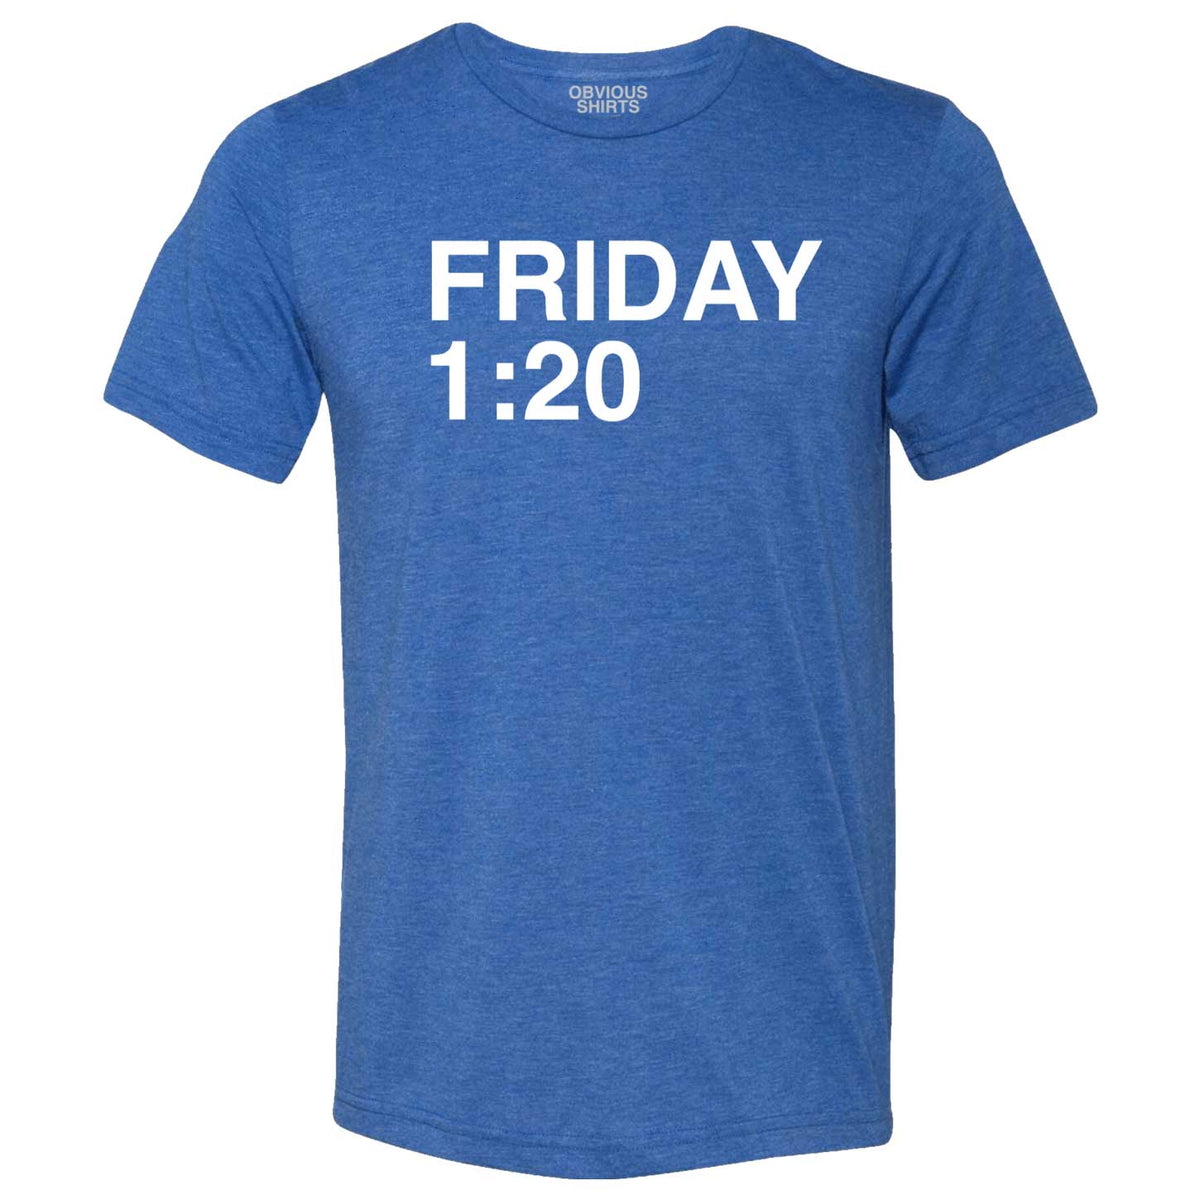 Cubs Players and Coaches Are Wearing Obvious Shirts This Weekend